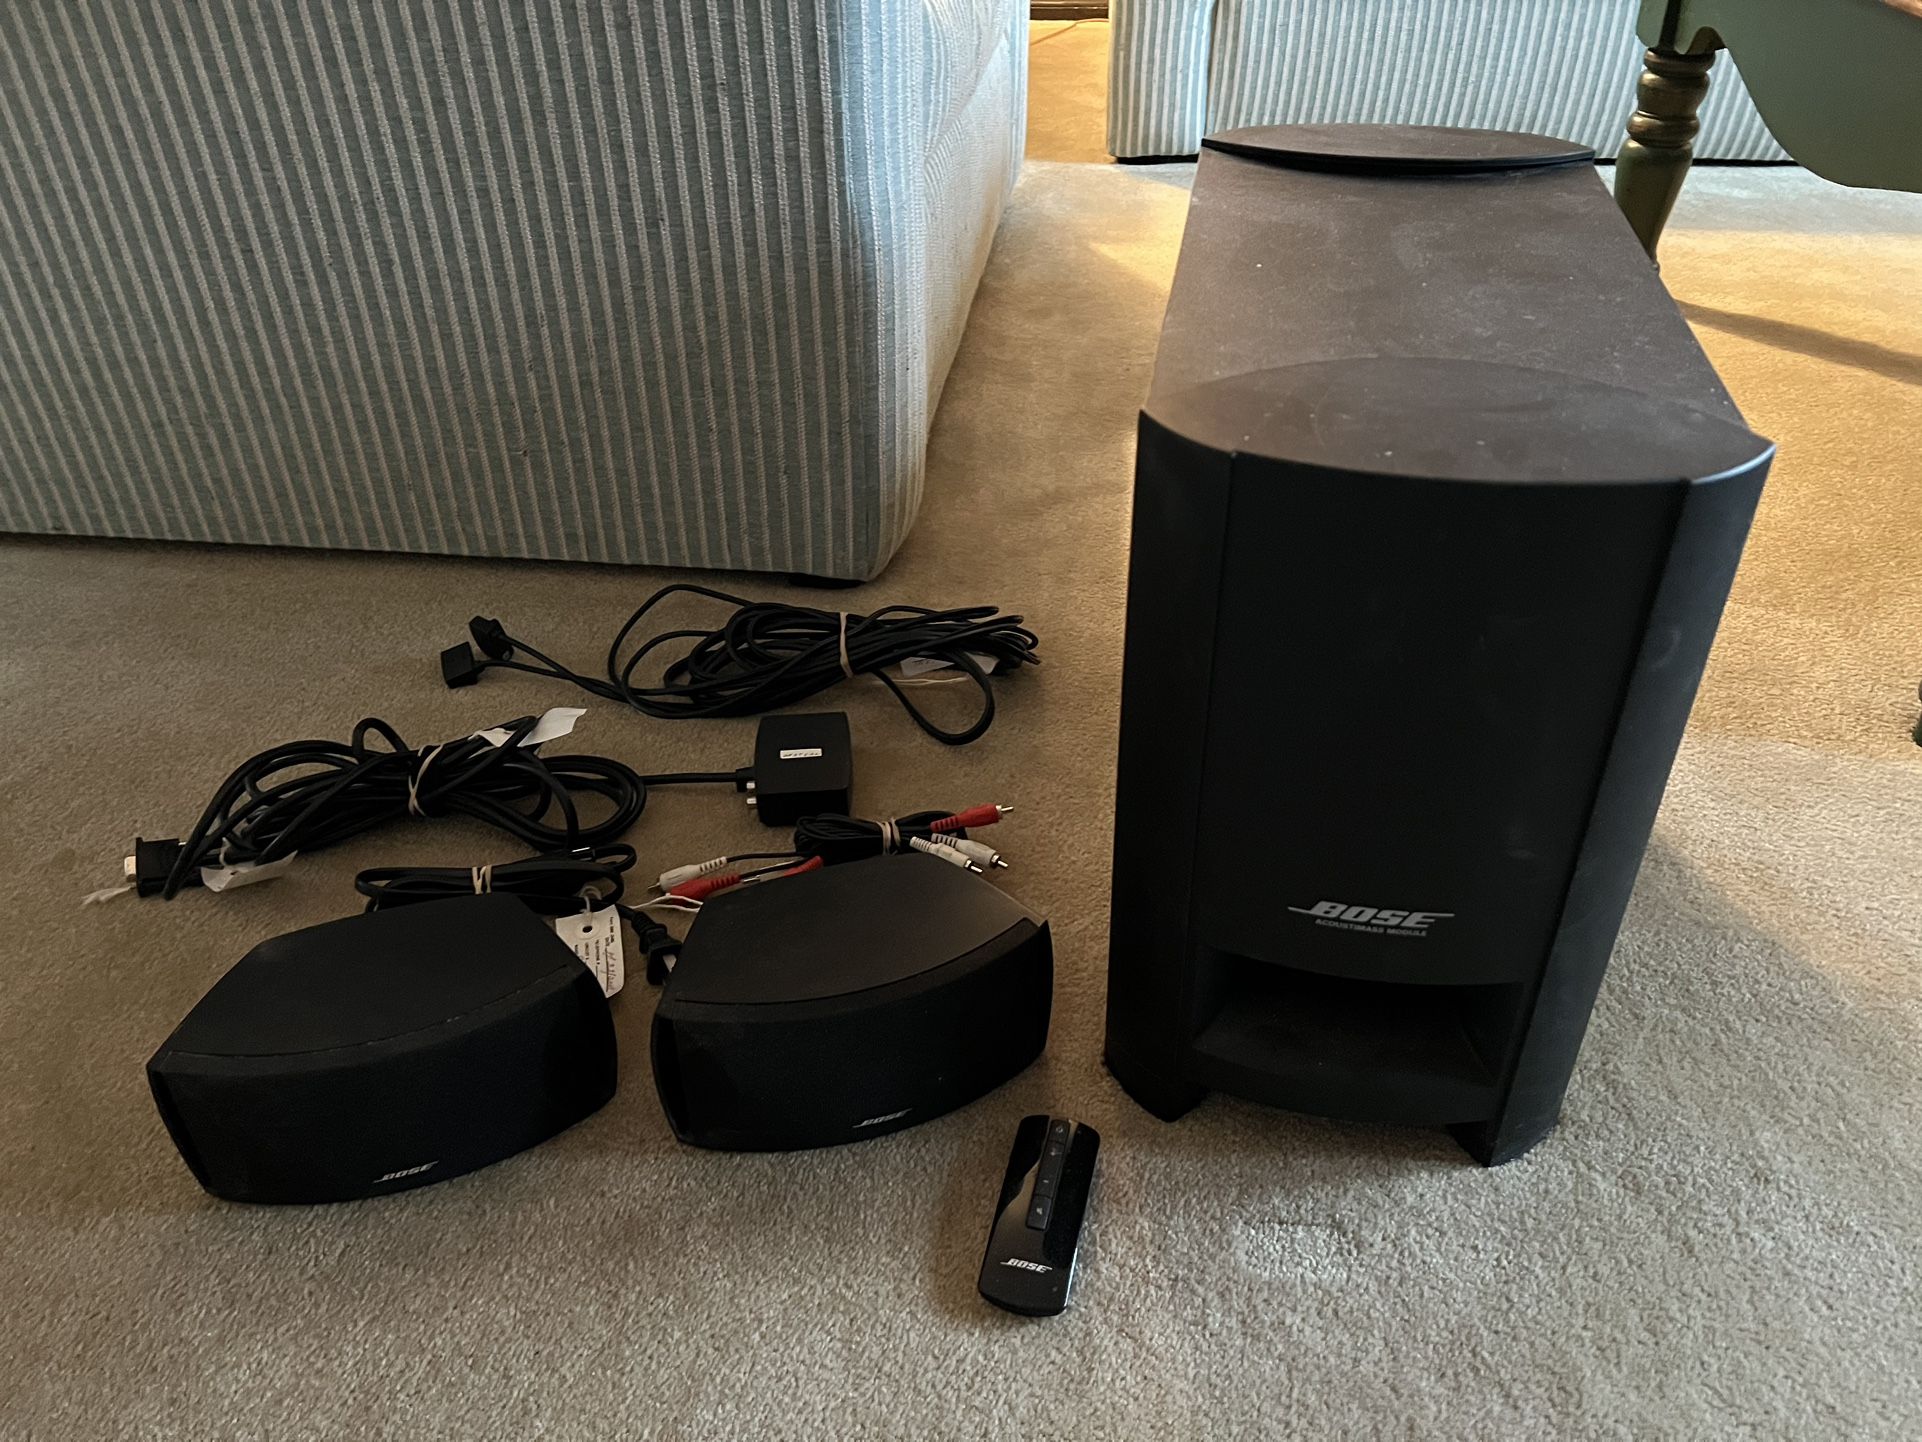 Bose Home Theater System